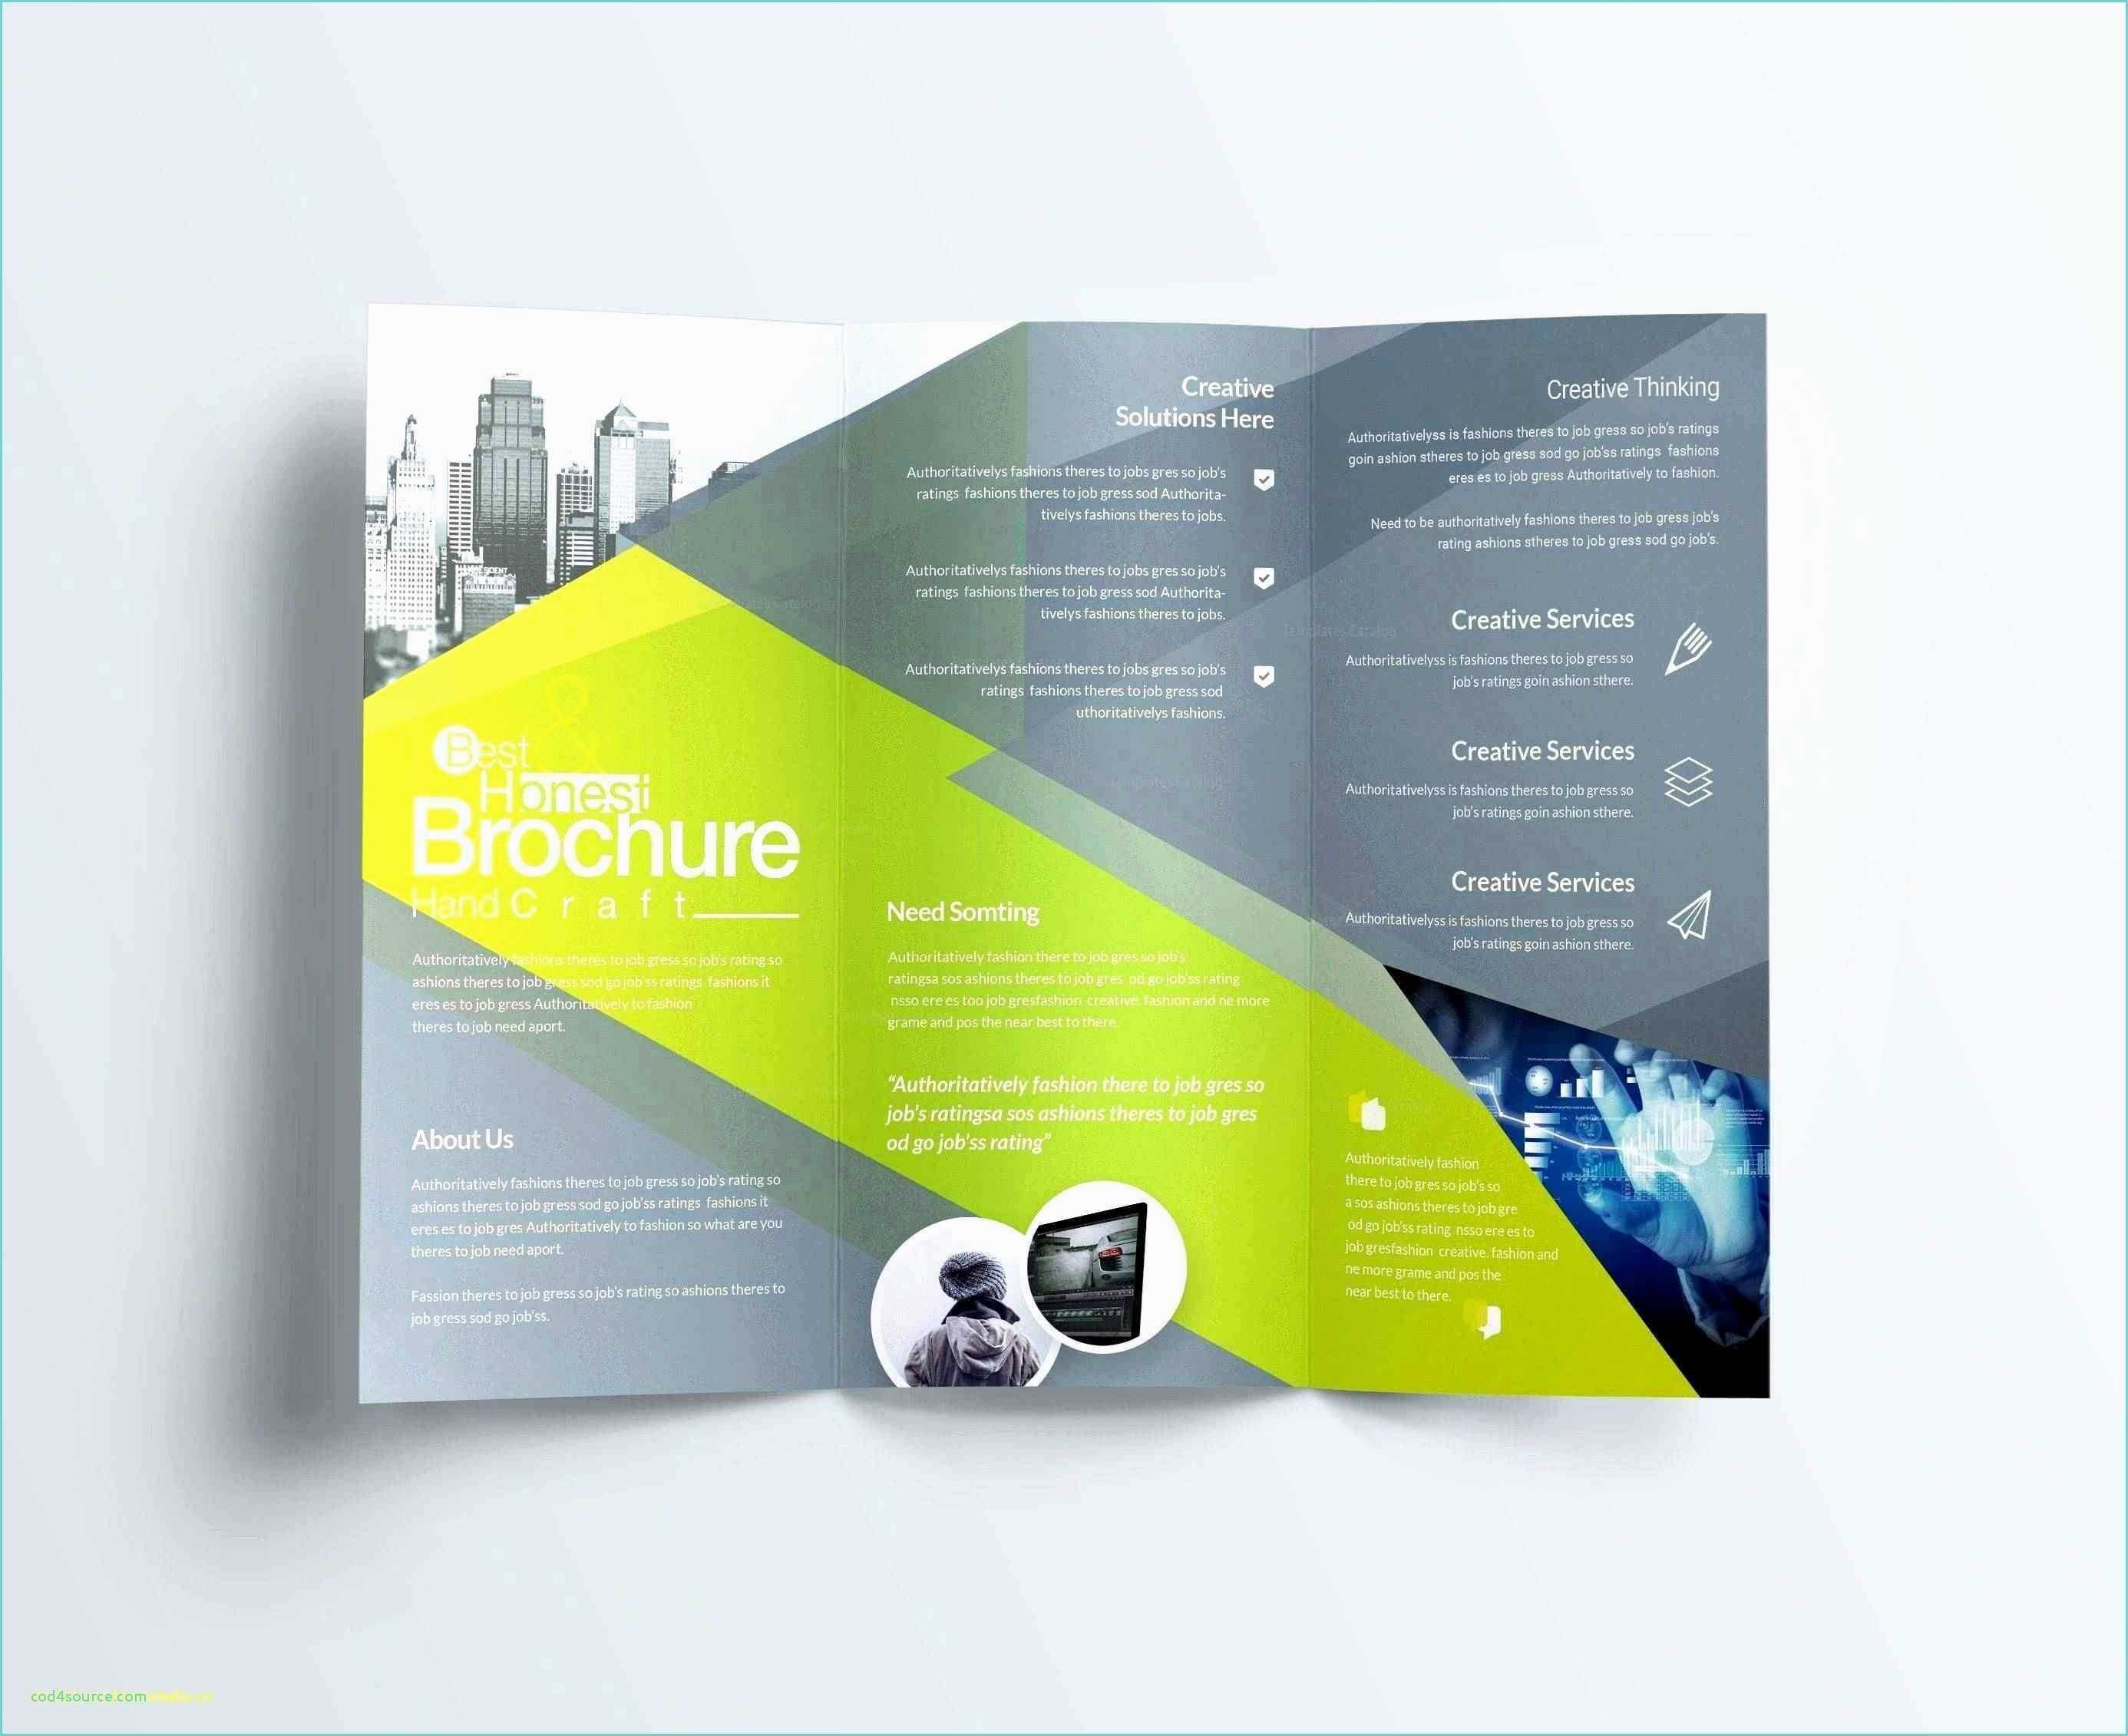 Pingprime Images On Letterhead Formats | Brochure In Mac Brochure Templates